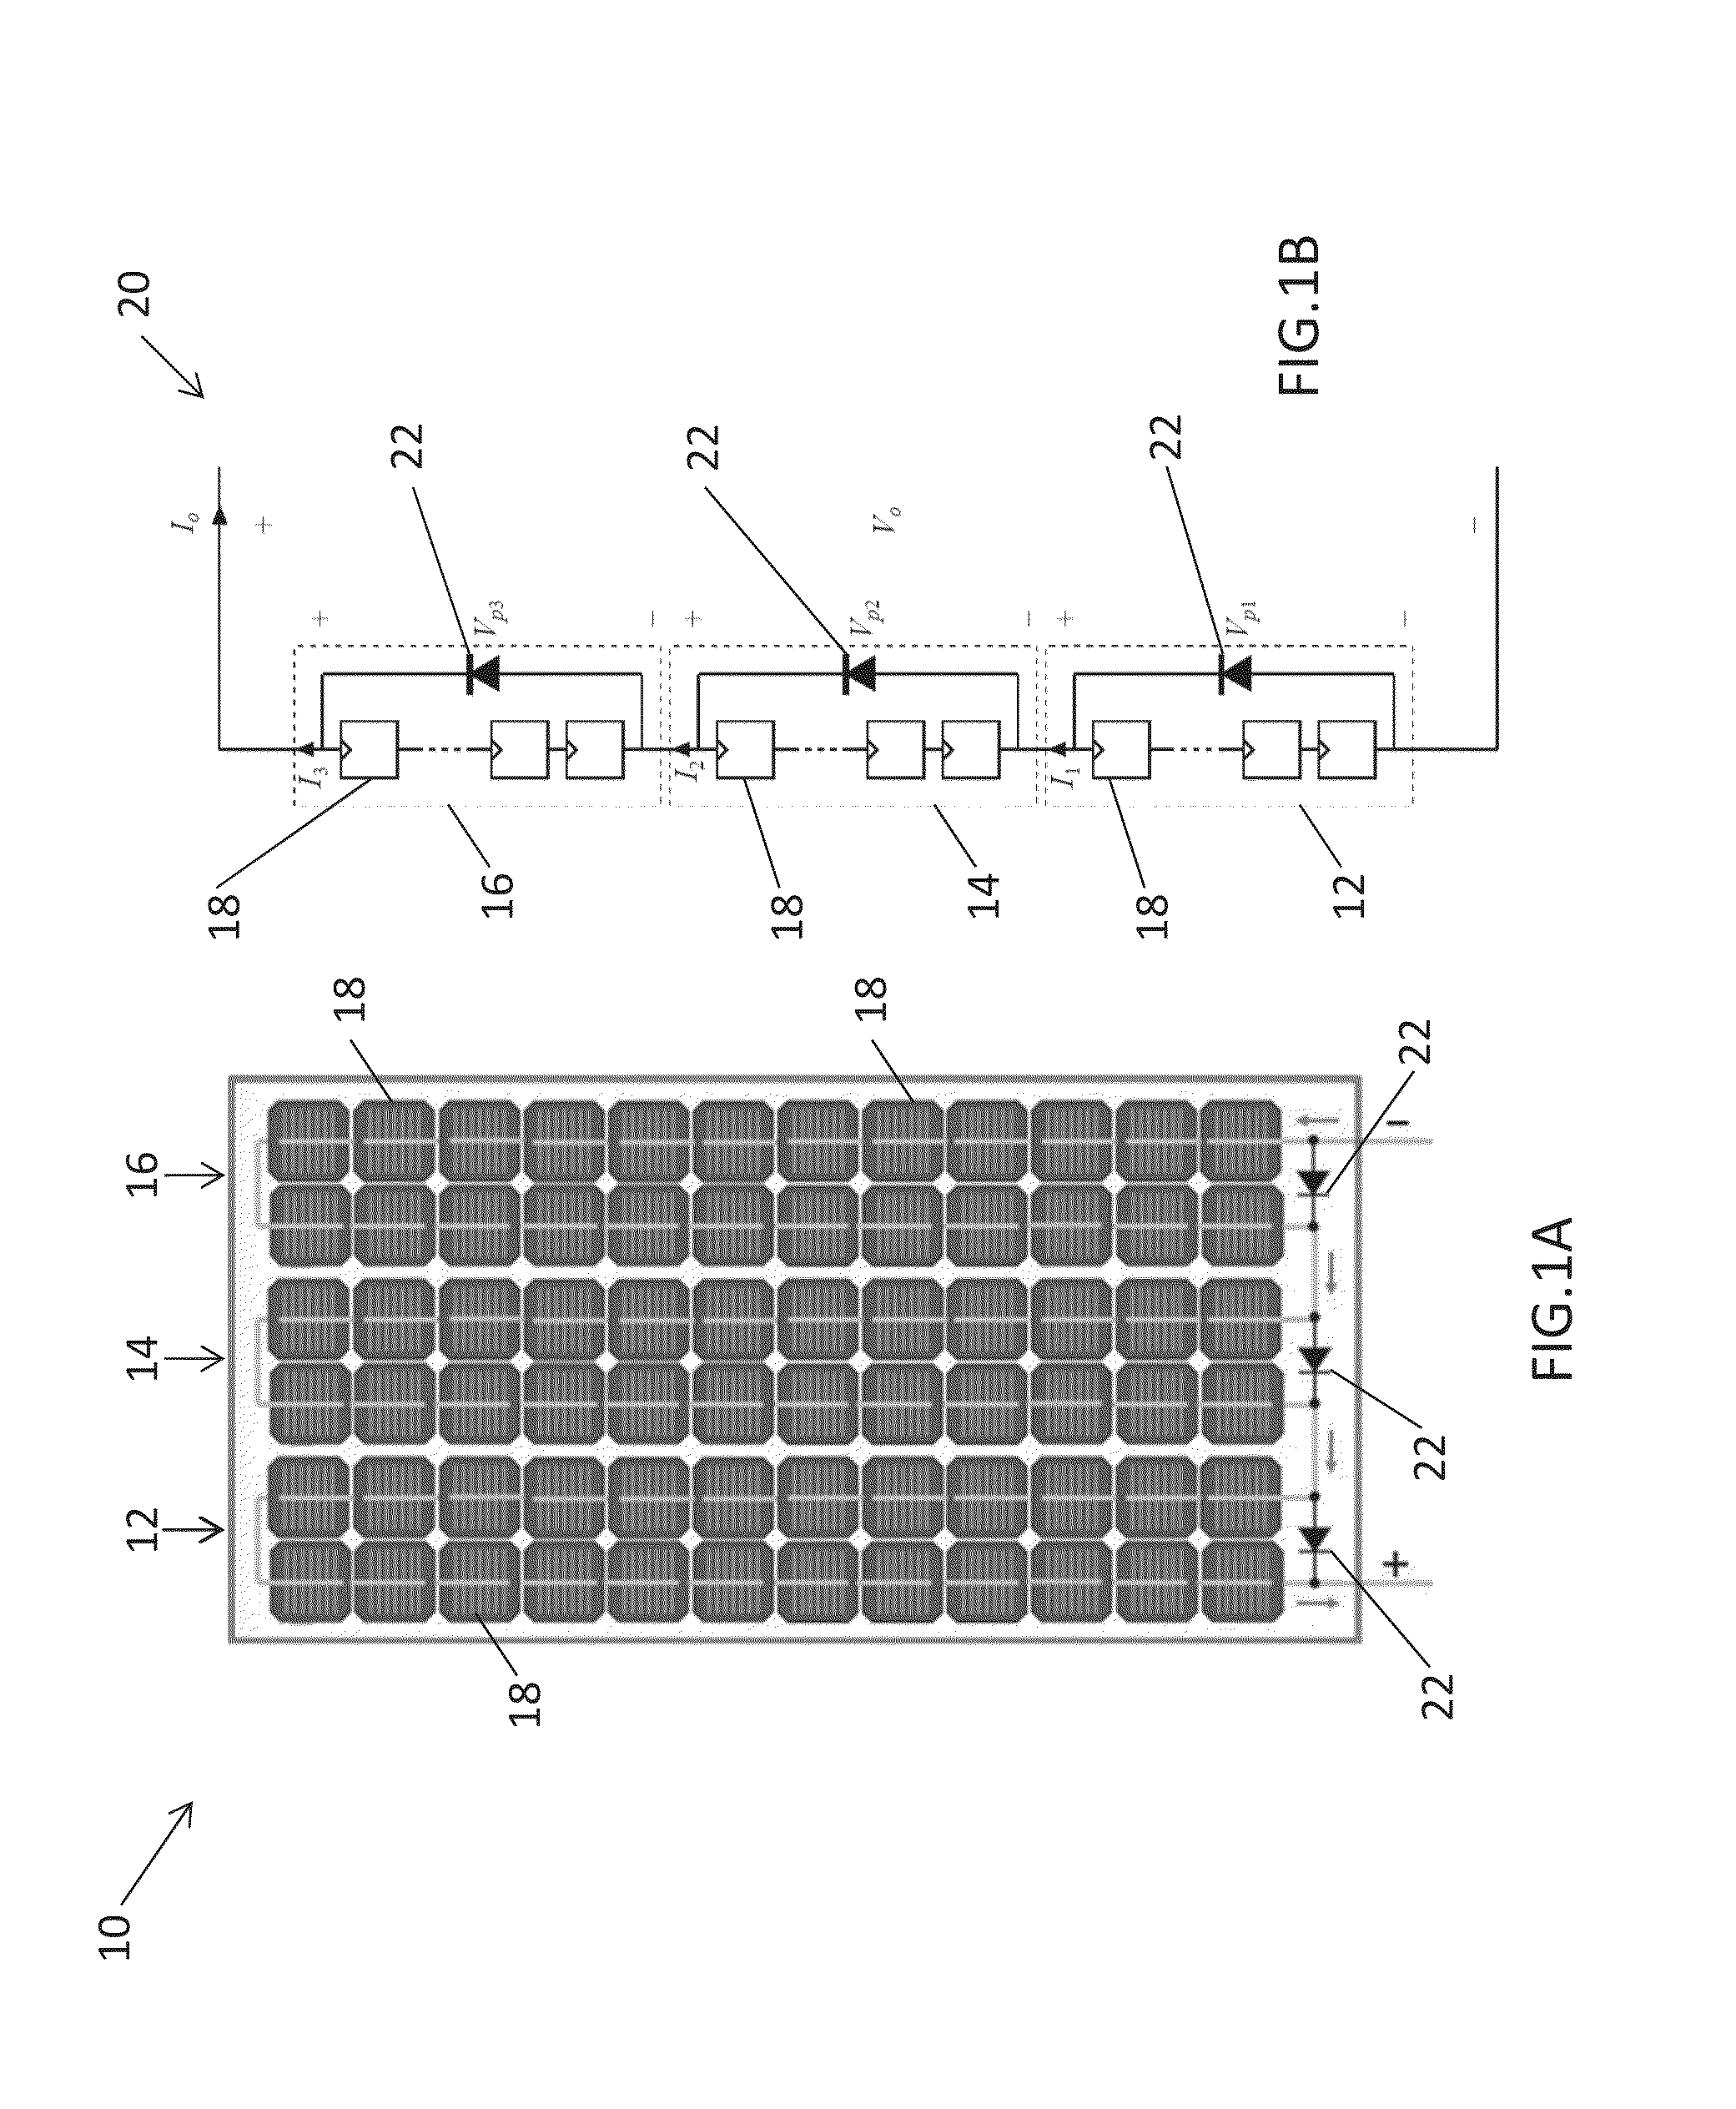 Balancing, filtering and/or controlling series-connected cells